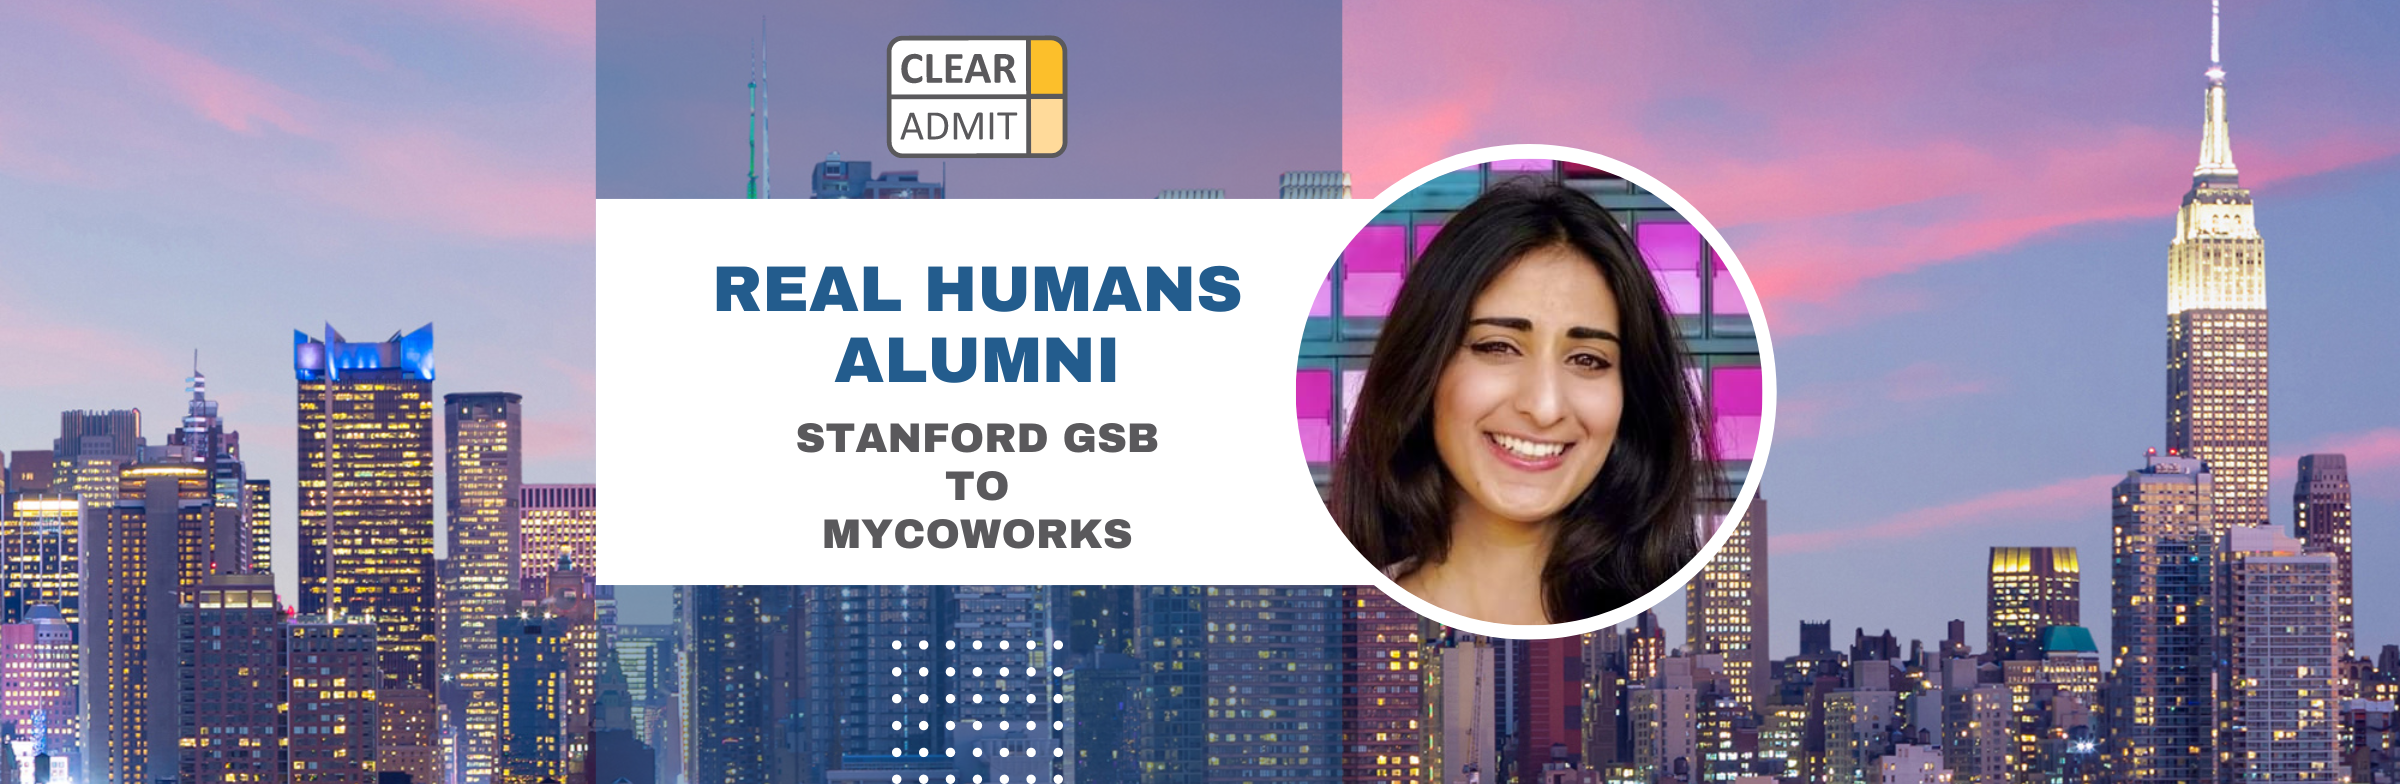 Image for Real Humans of MycoWorks: Nina Sabharwal, Stanford GSB MBA ’23, Strategic Advisor to the CEO